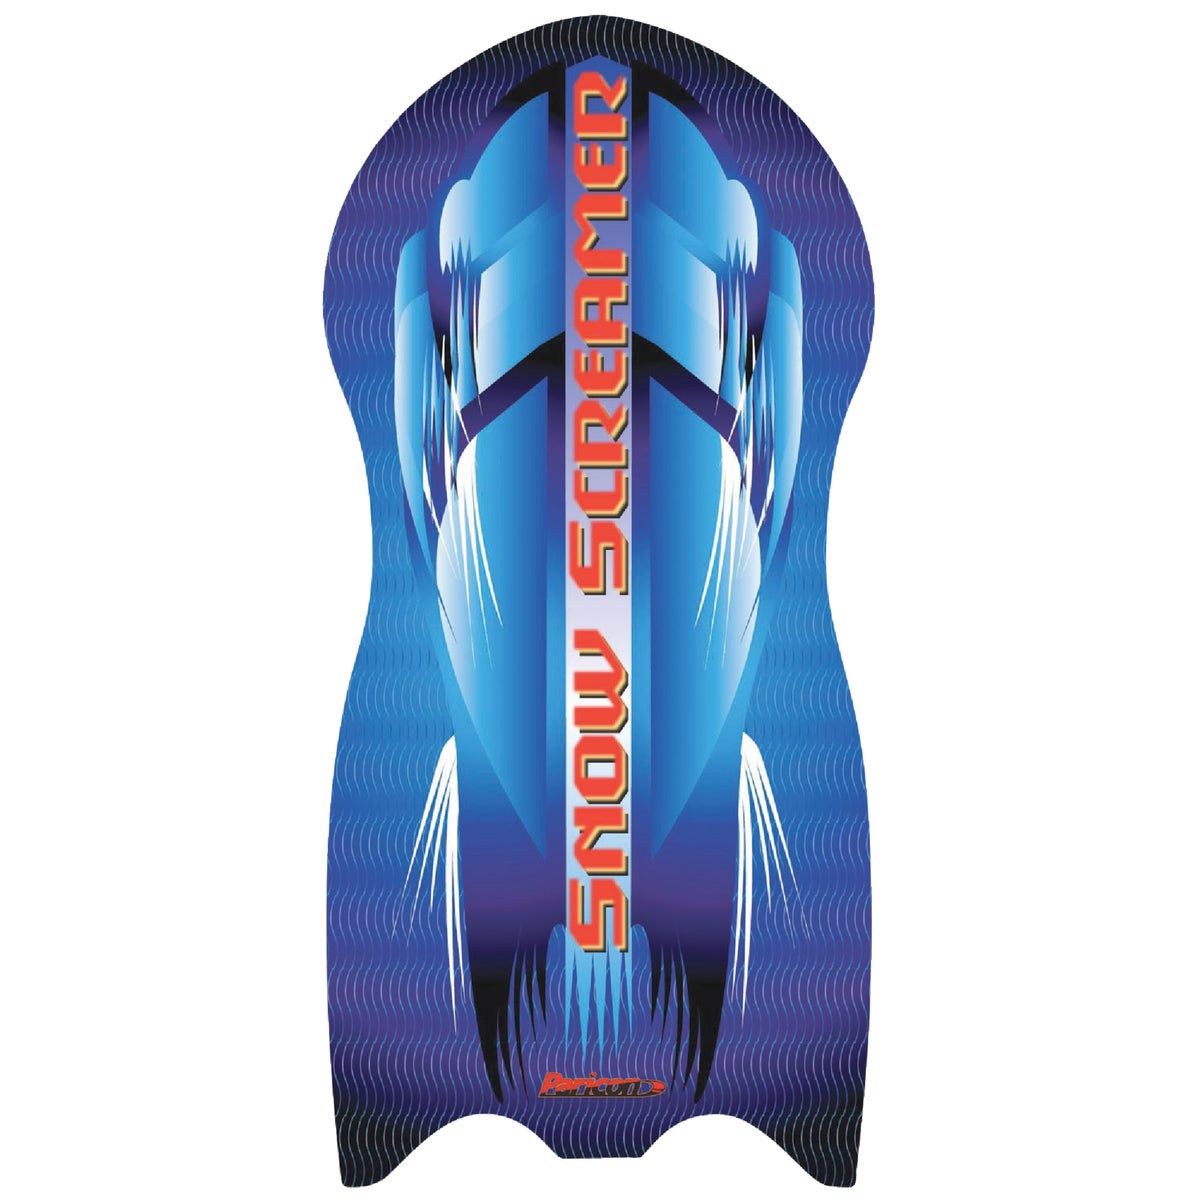 Item 805383, 47-inch foam sled with 2 sets of soft foam hand grips. Cool graphics.